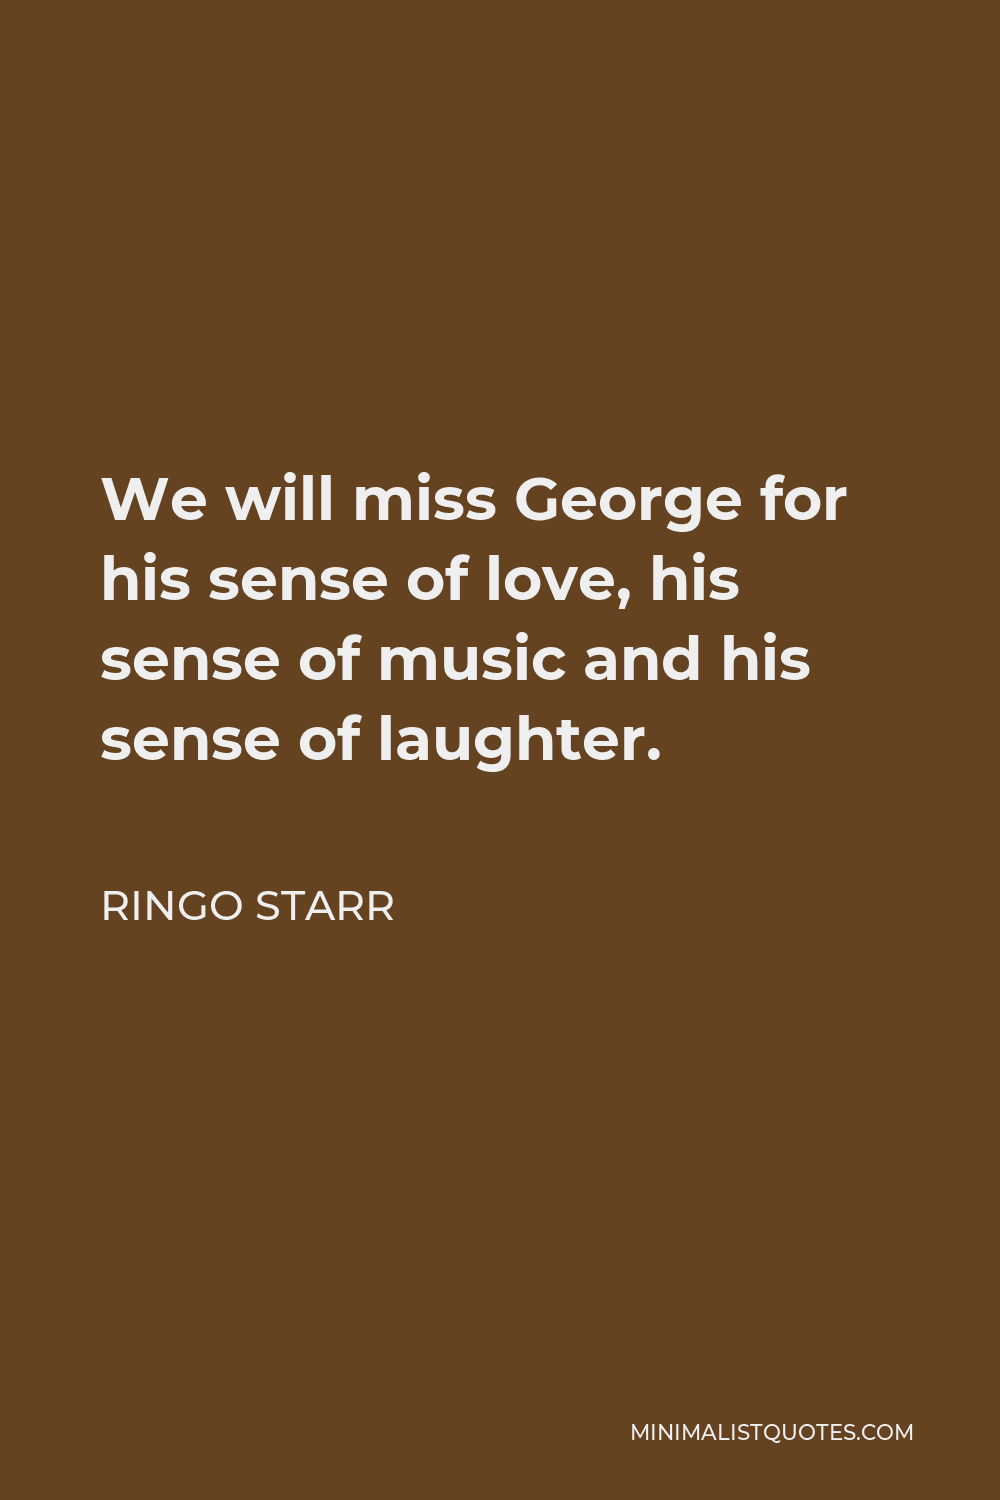 Ringo Starr Quote - We will miss George for his sense of love, his sense of music and his sense of laughter.